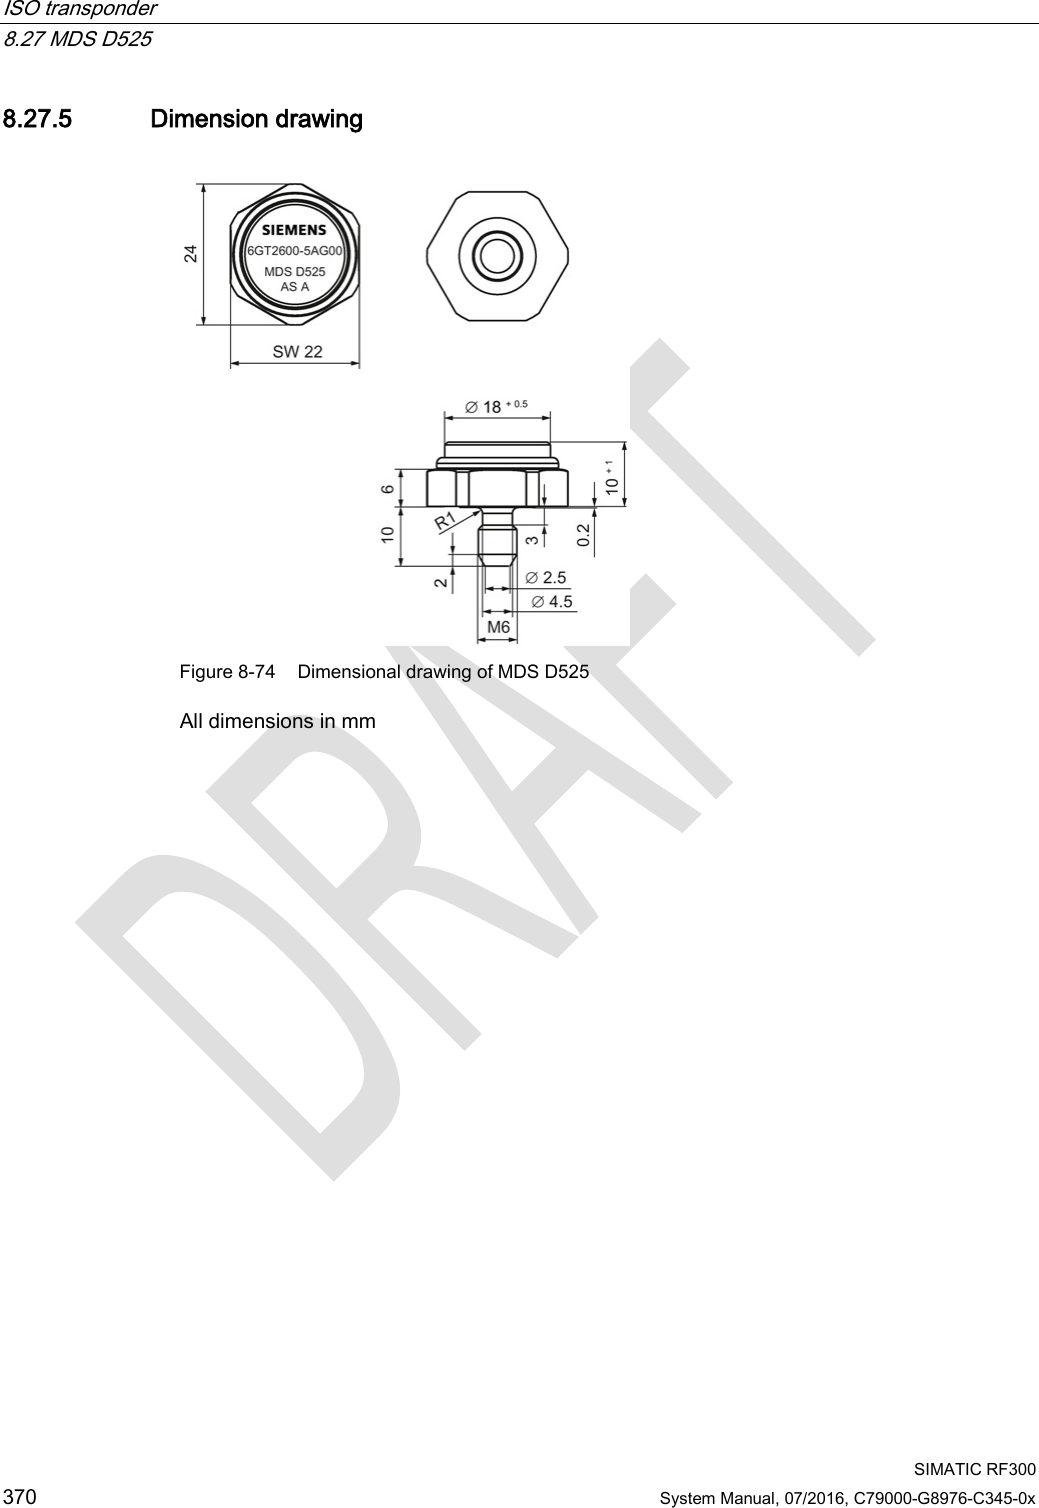 ISO transponder   8.27 MDS D525  SIMATIC RF300 370 System Manual, 07/2016, C79000-G8976-C345-0x 8.27.5 Dimension drawing  Figure 8-74 Dimensional drawing of MDS D525 All dimensions in mm  